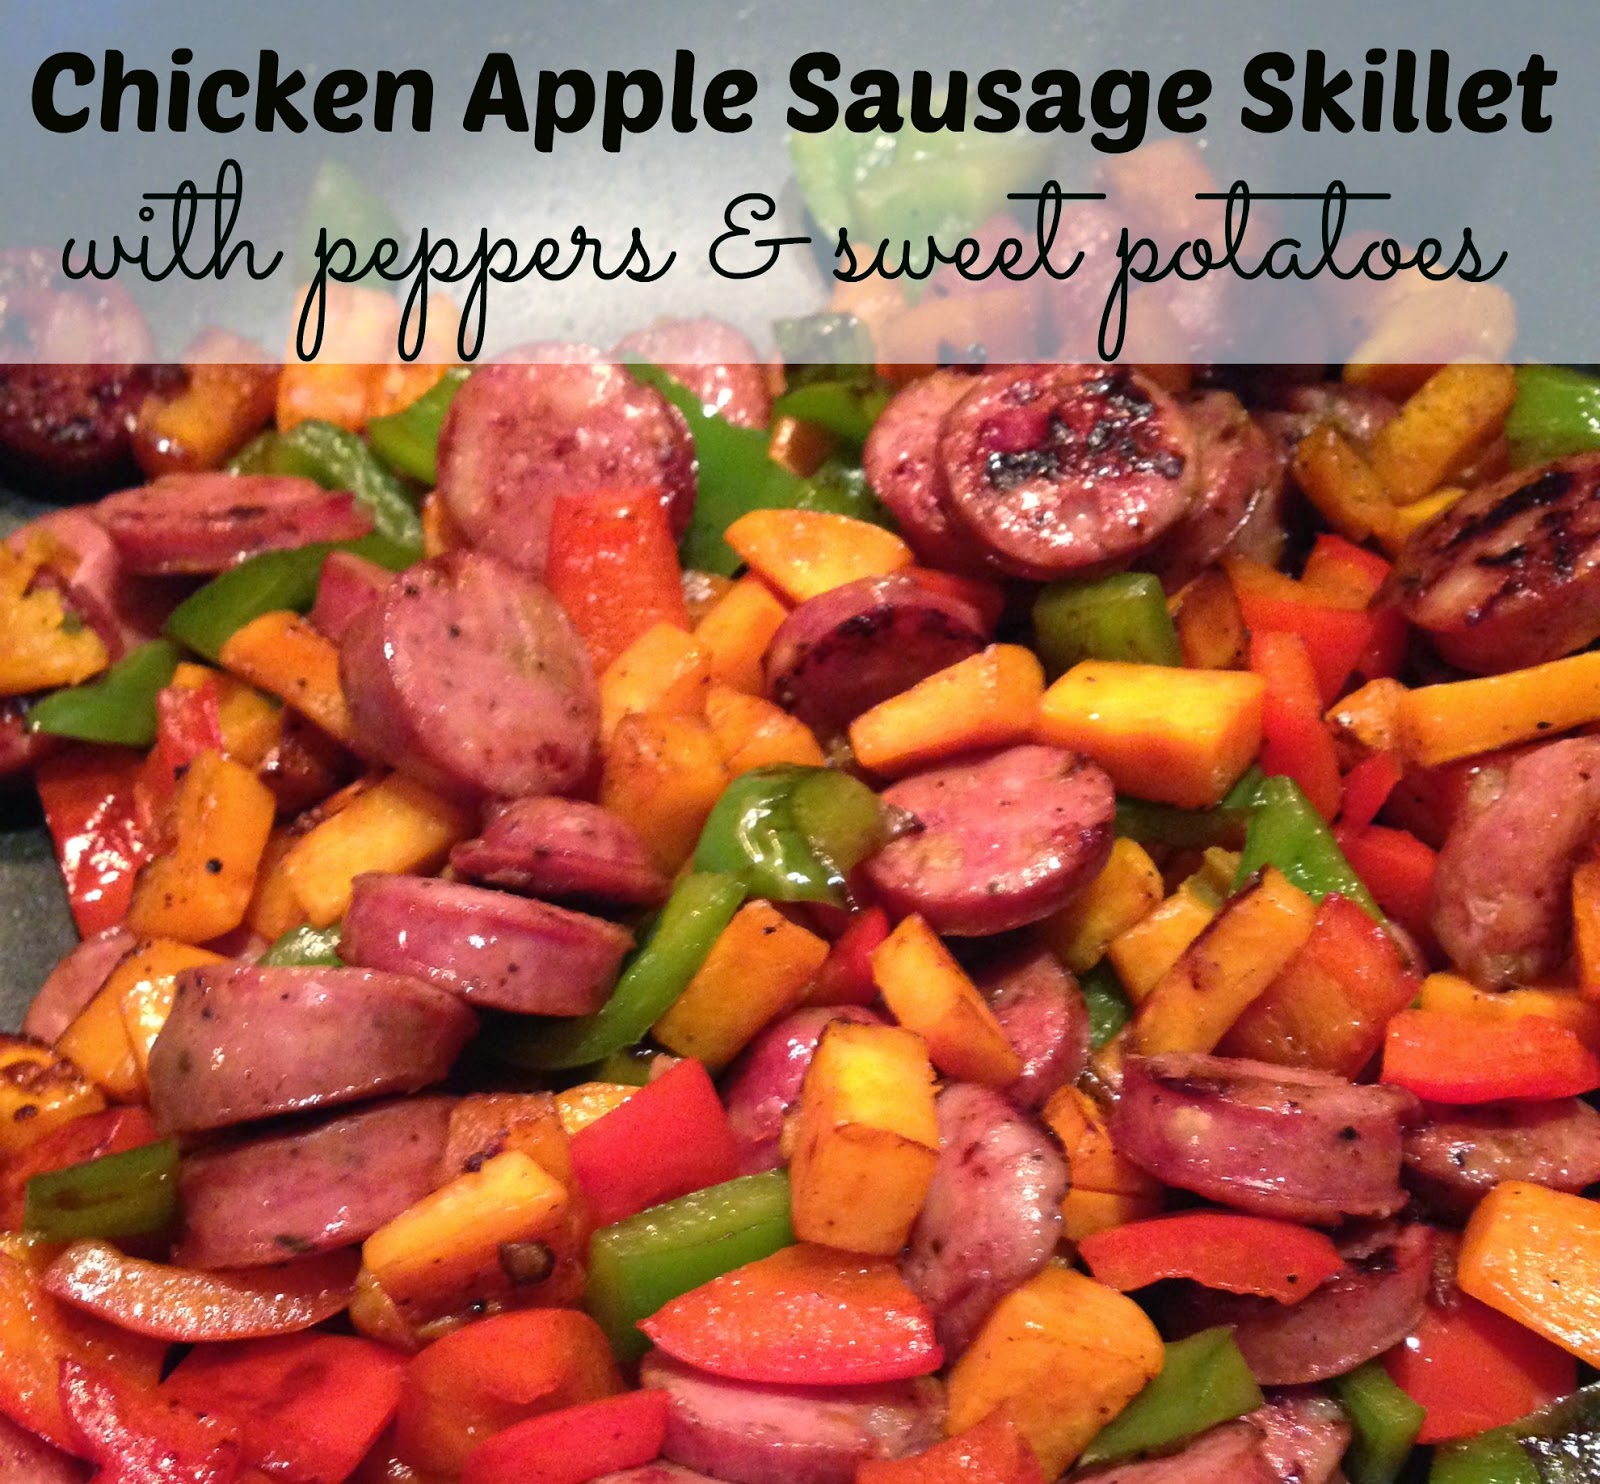 simply made with love: Chicken Apple Sausage Skillet II